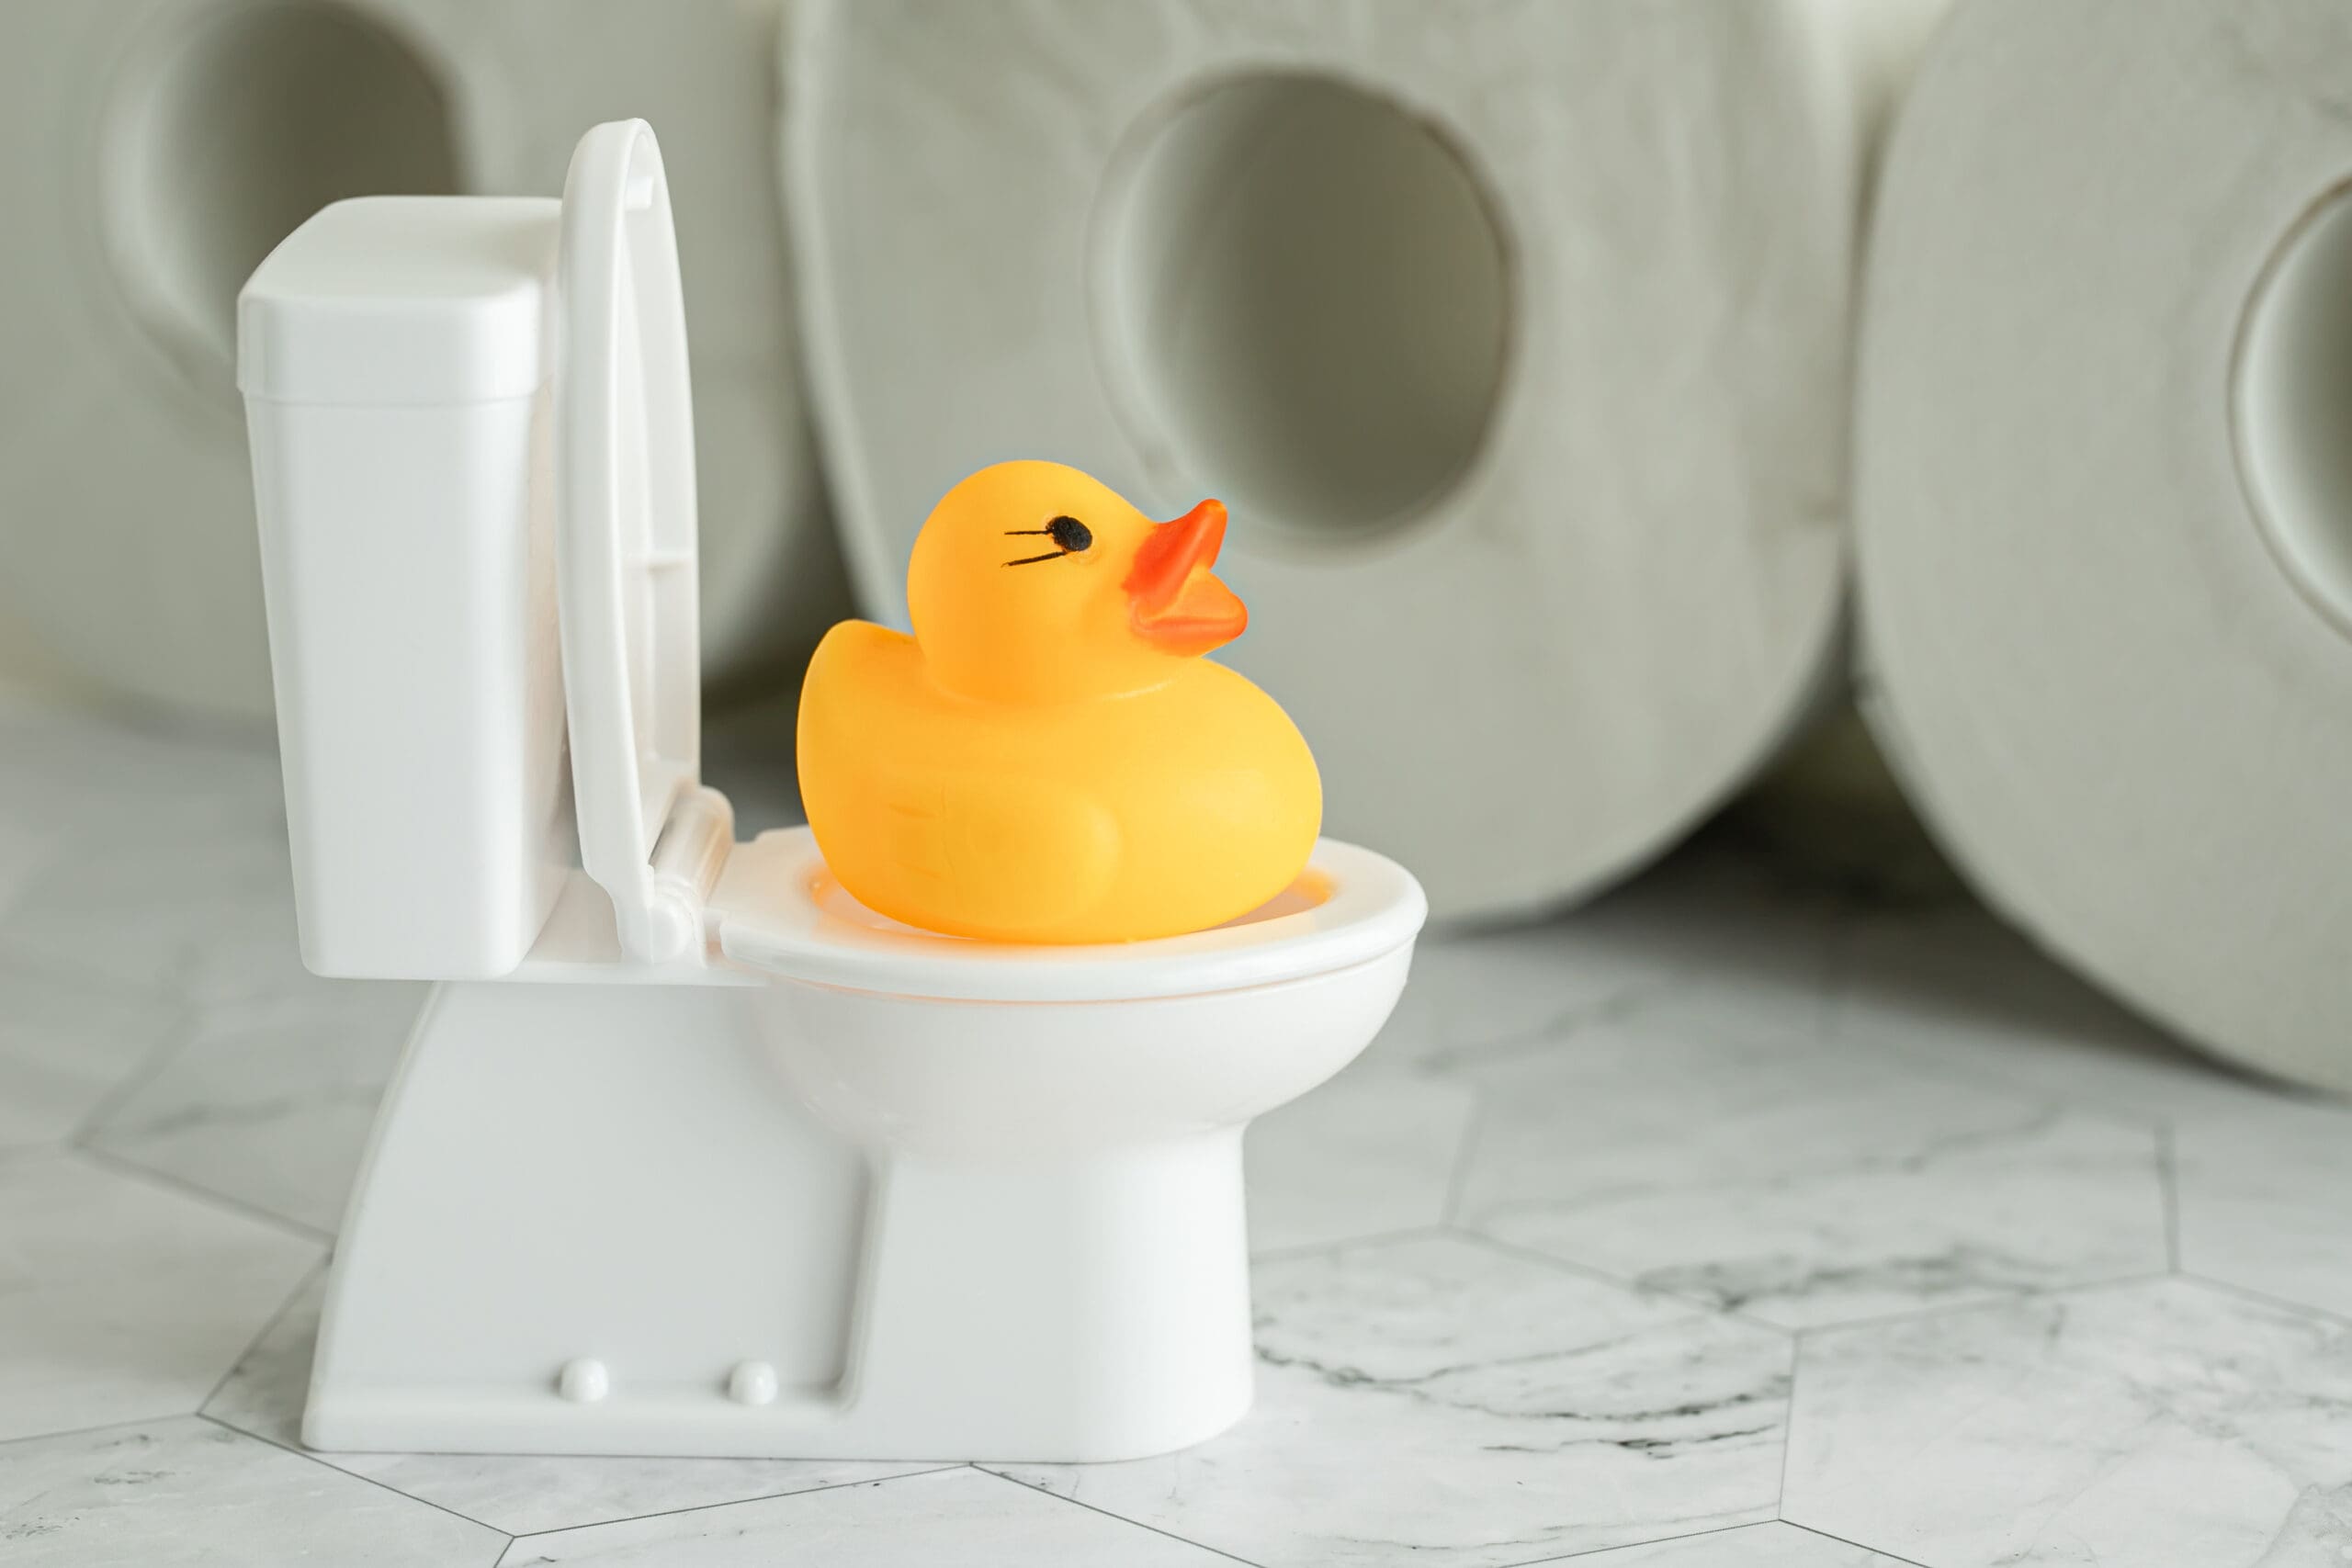 Toilet and Rubber Ducky